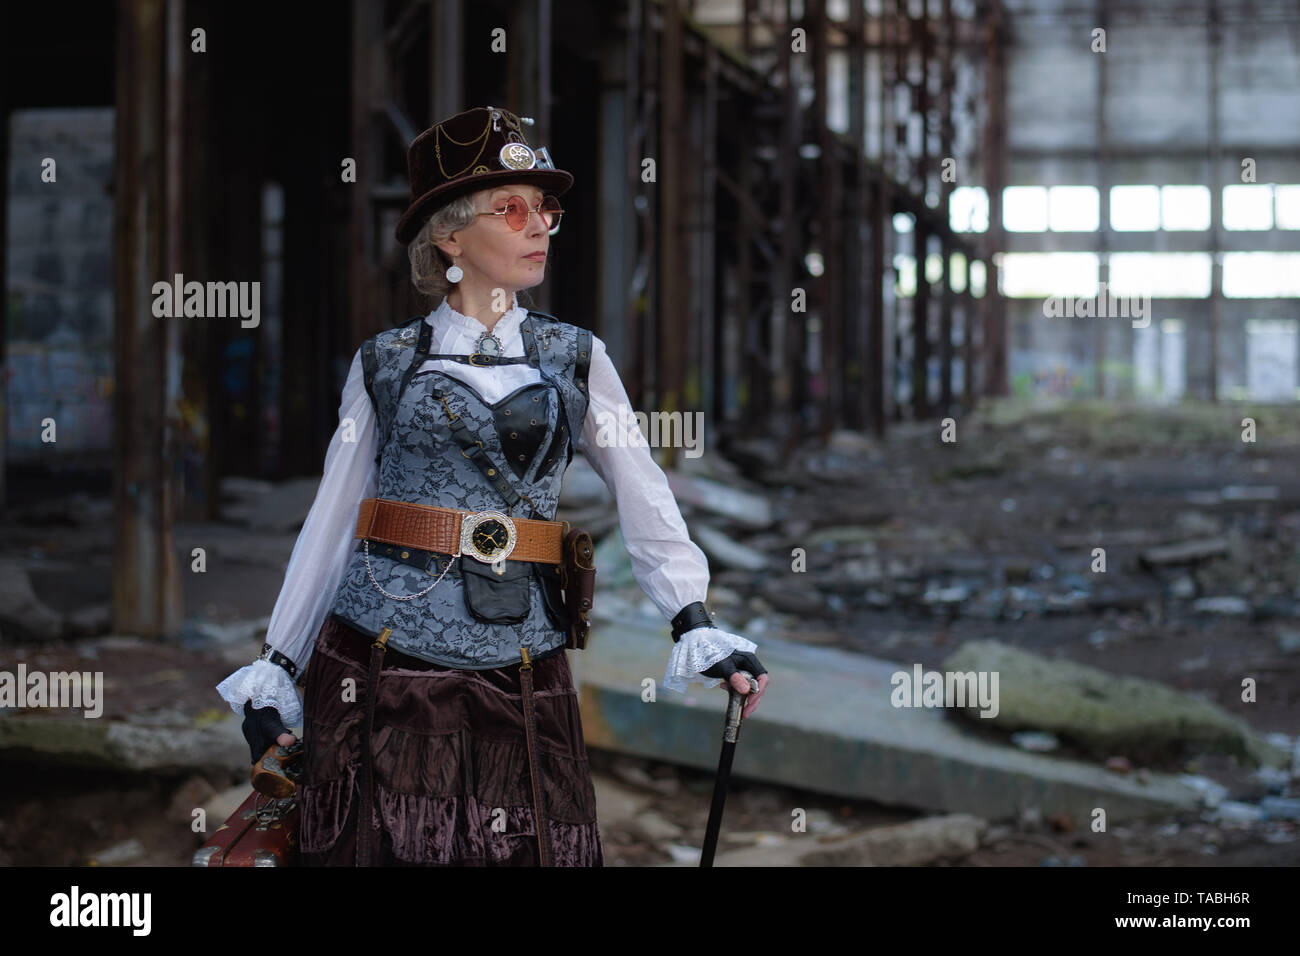 elderly lady in a steampunk costume at an abandoned factory with arms in hand. Stock Photo